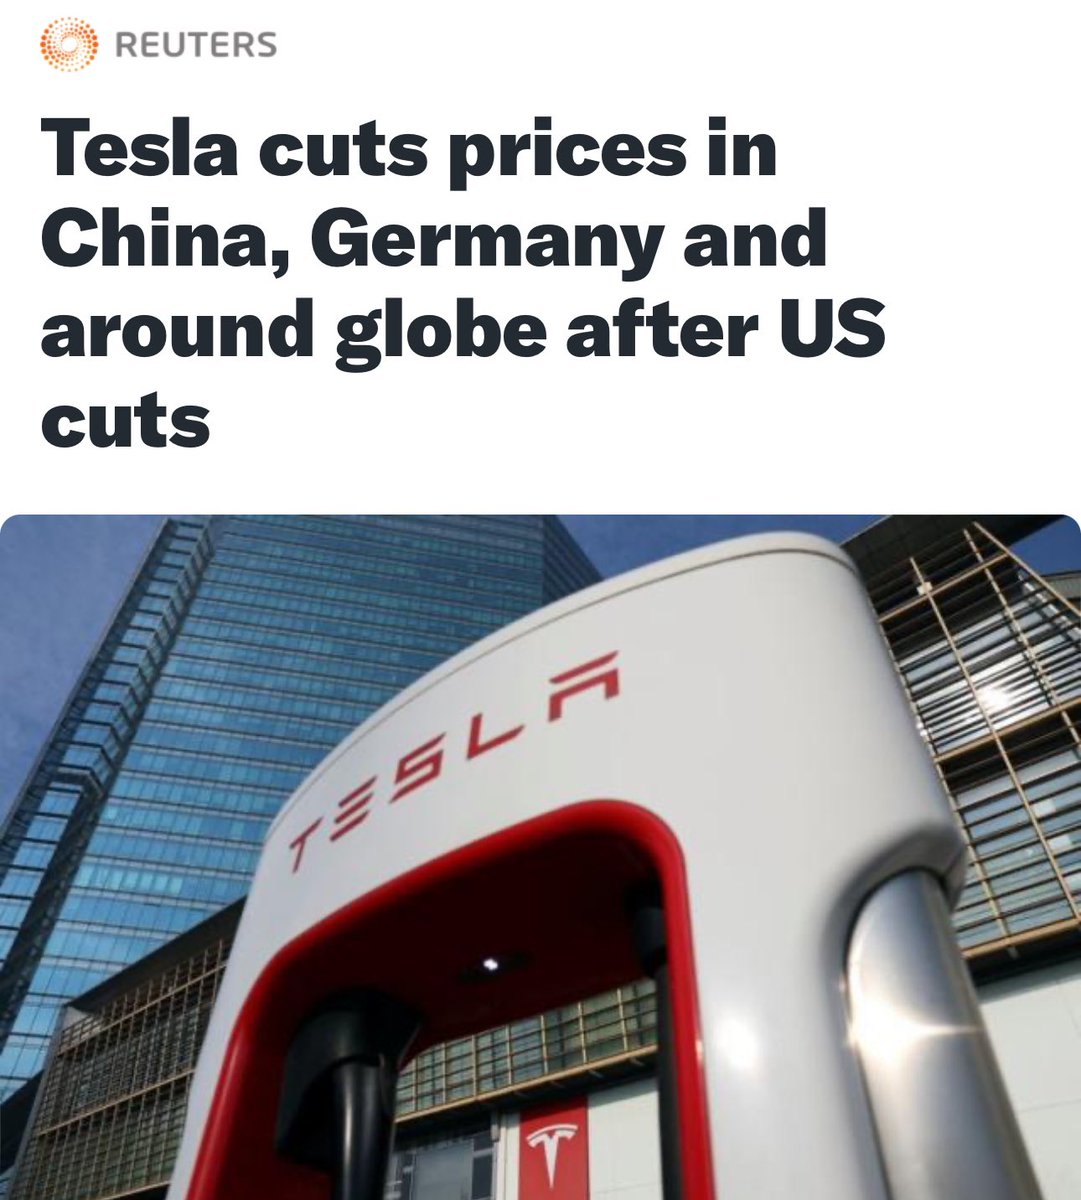 Drudge Report on a ‘Tesla Crisis’: You can save on fuel with an EV… but the decline in re-sale value and higher insurance costs wipes out your savings That is the crux of the issue Also, Do you think Cathie Wood and ARKK really know what they are doing? ARKK should fire